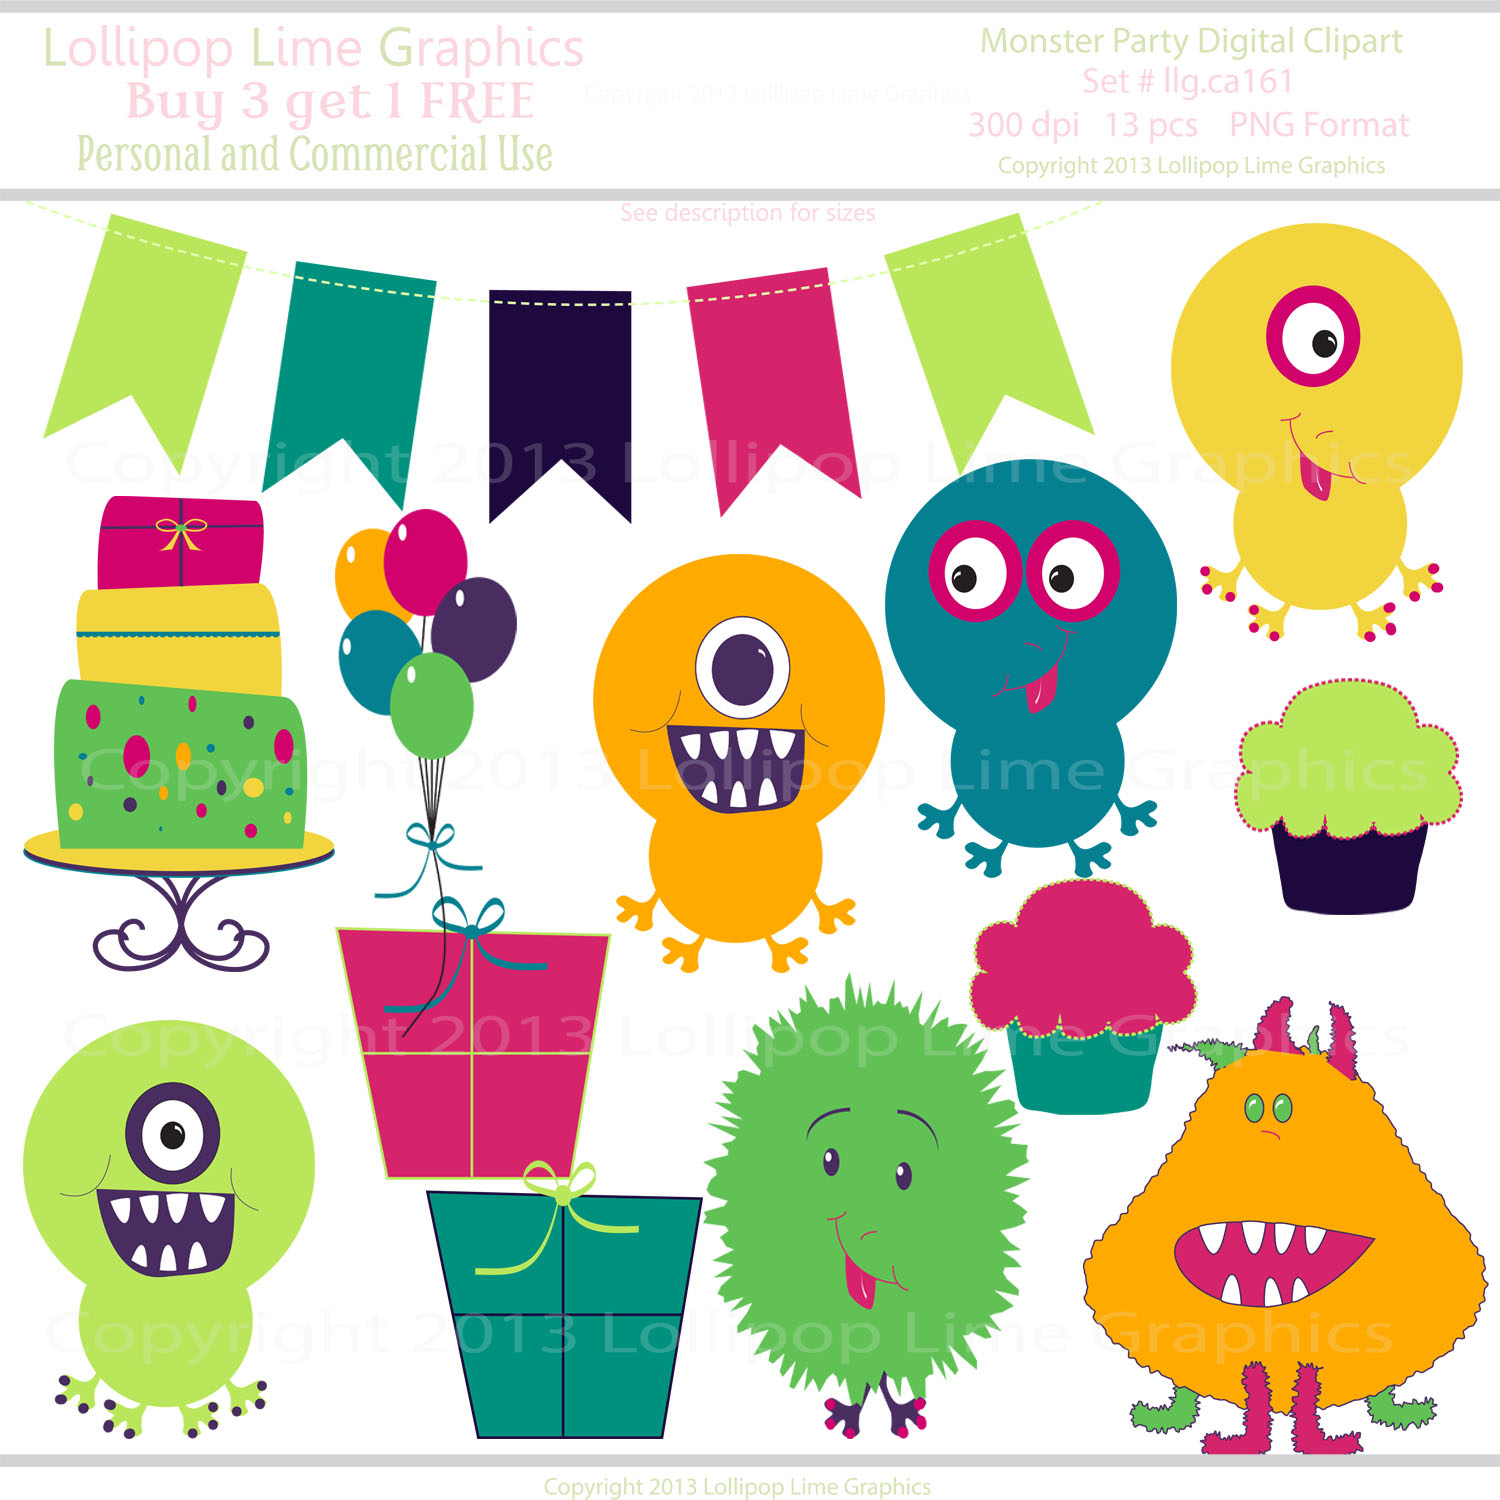 Cute Little Monster Party Digital Clipart Monsters Balloons Cake